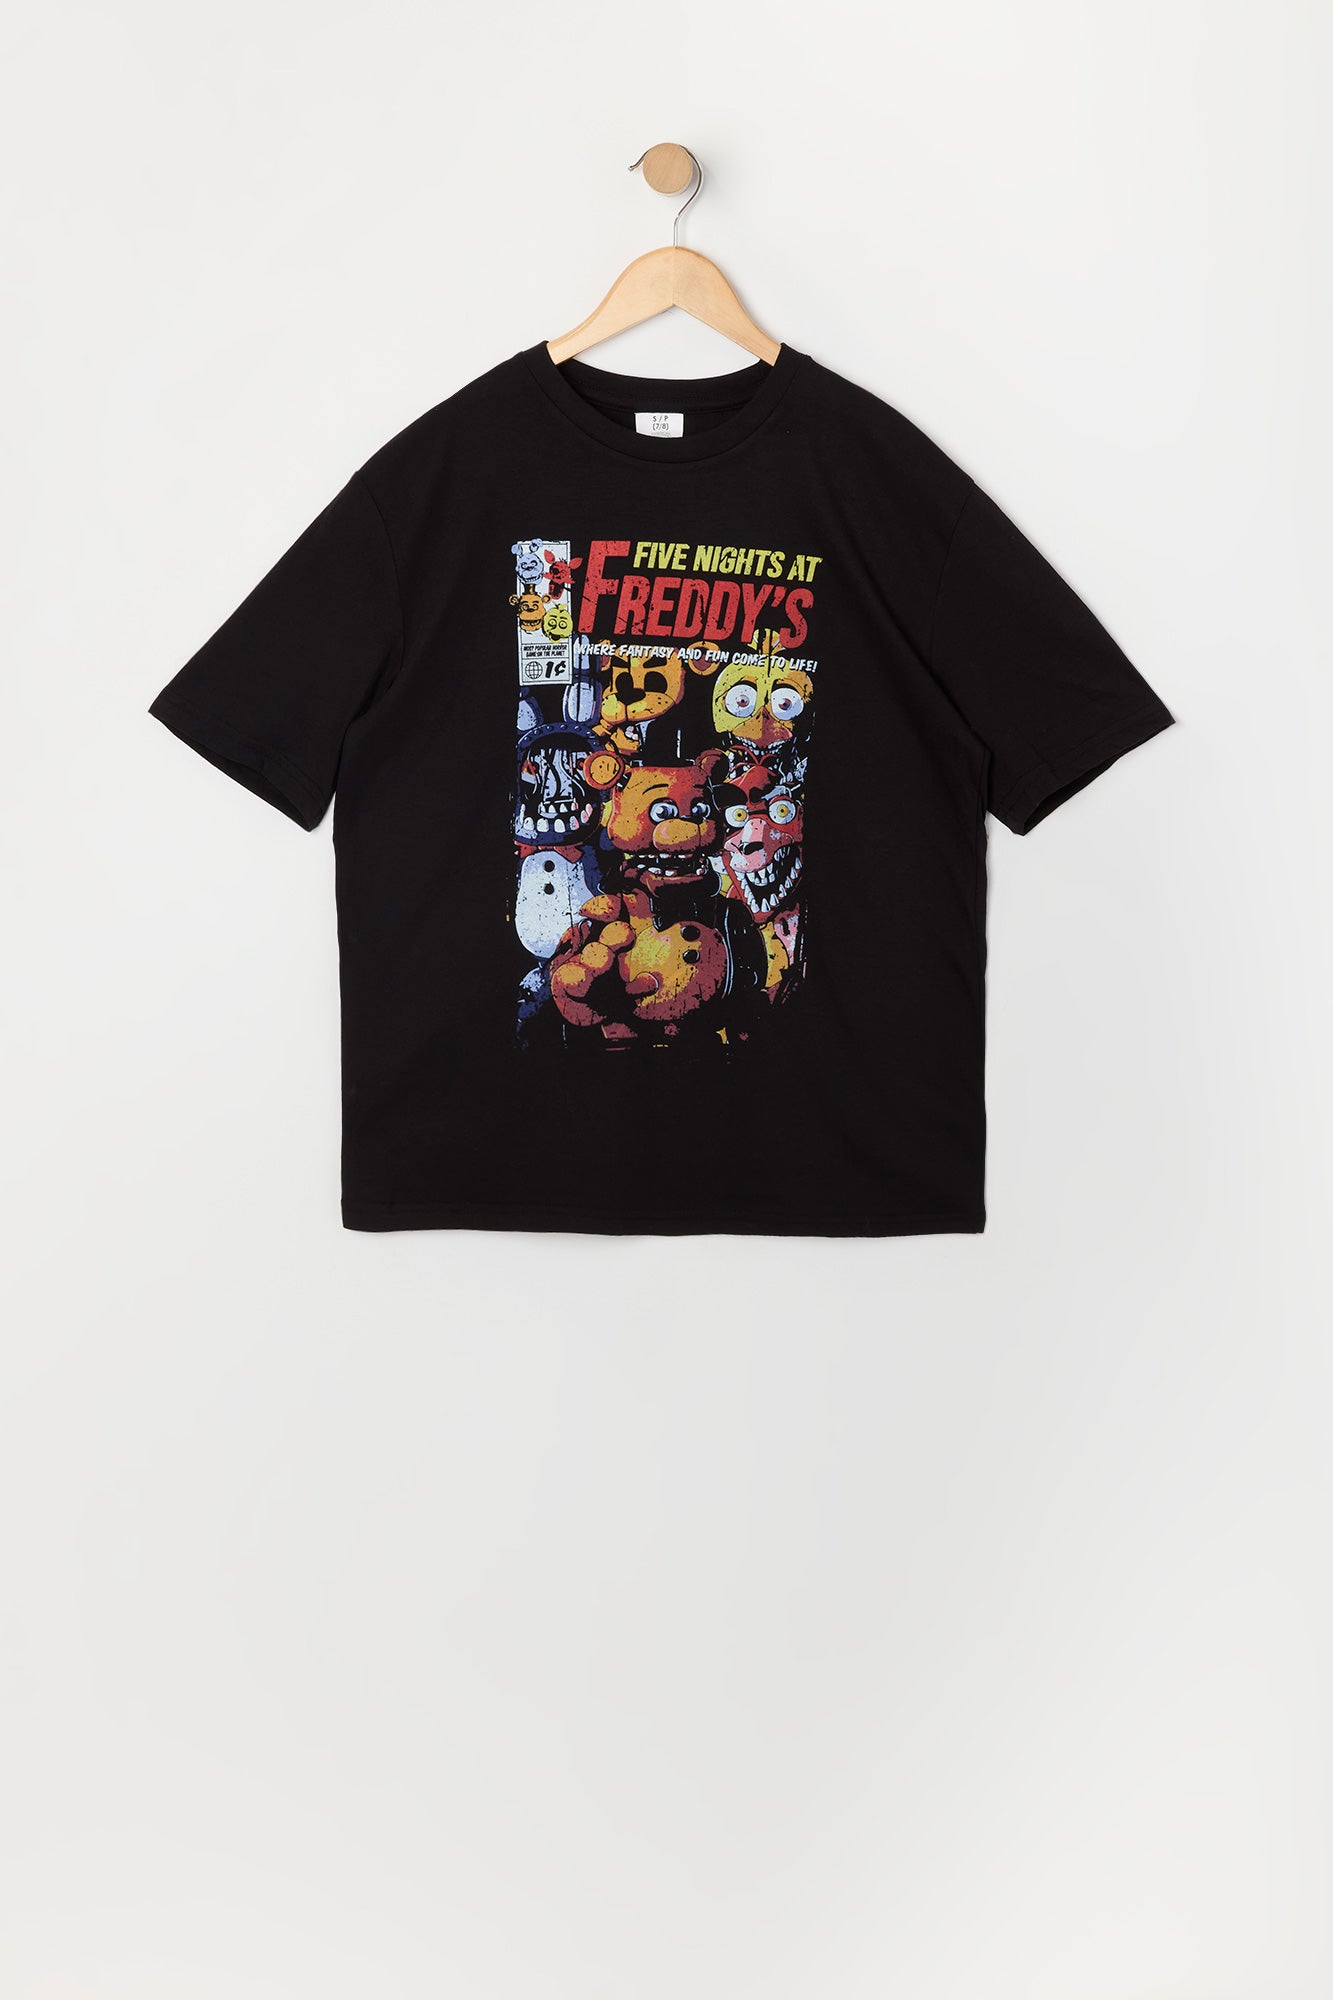 Boys Freddy's Fantasy Come to Life Graphic T-Shirt